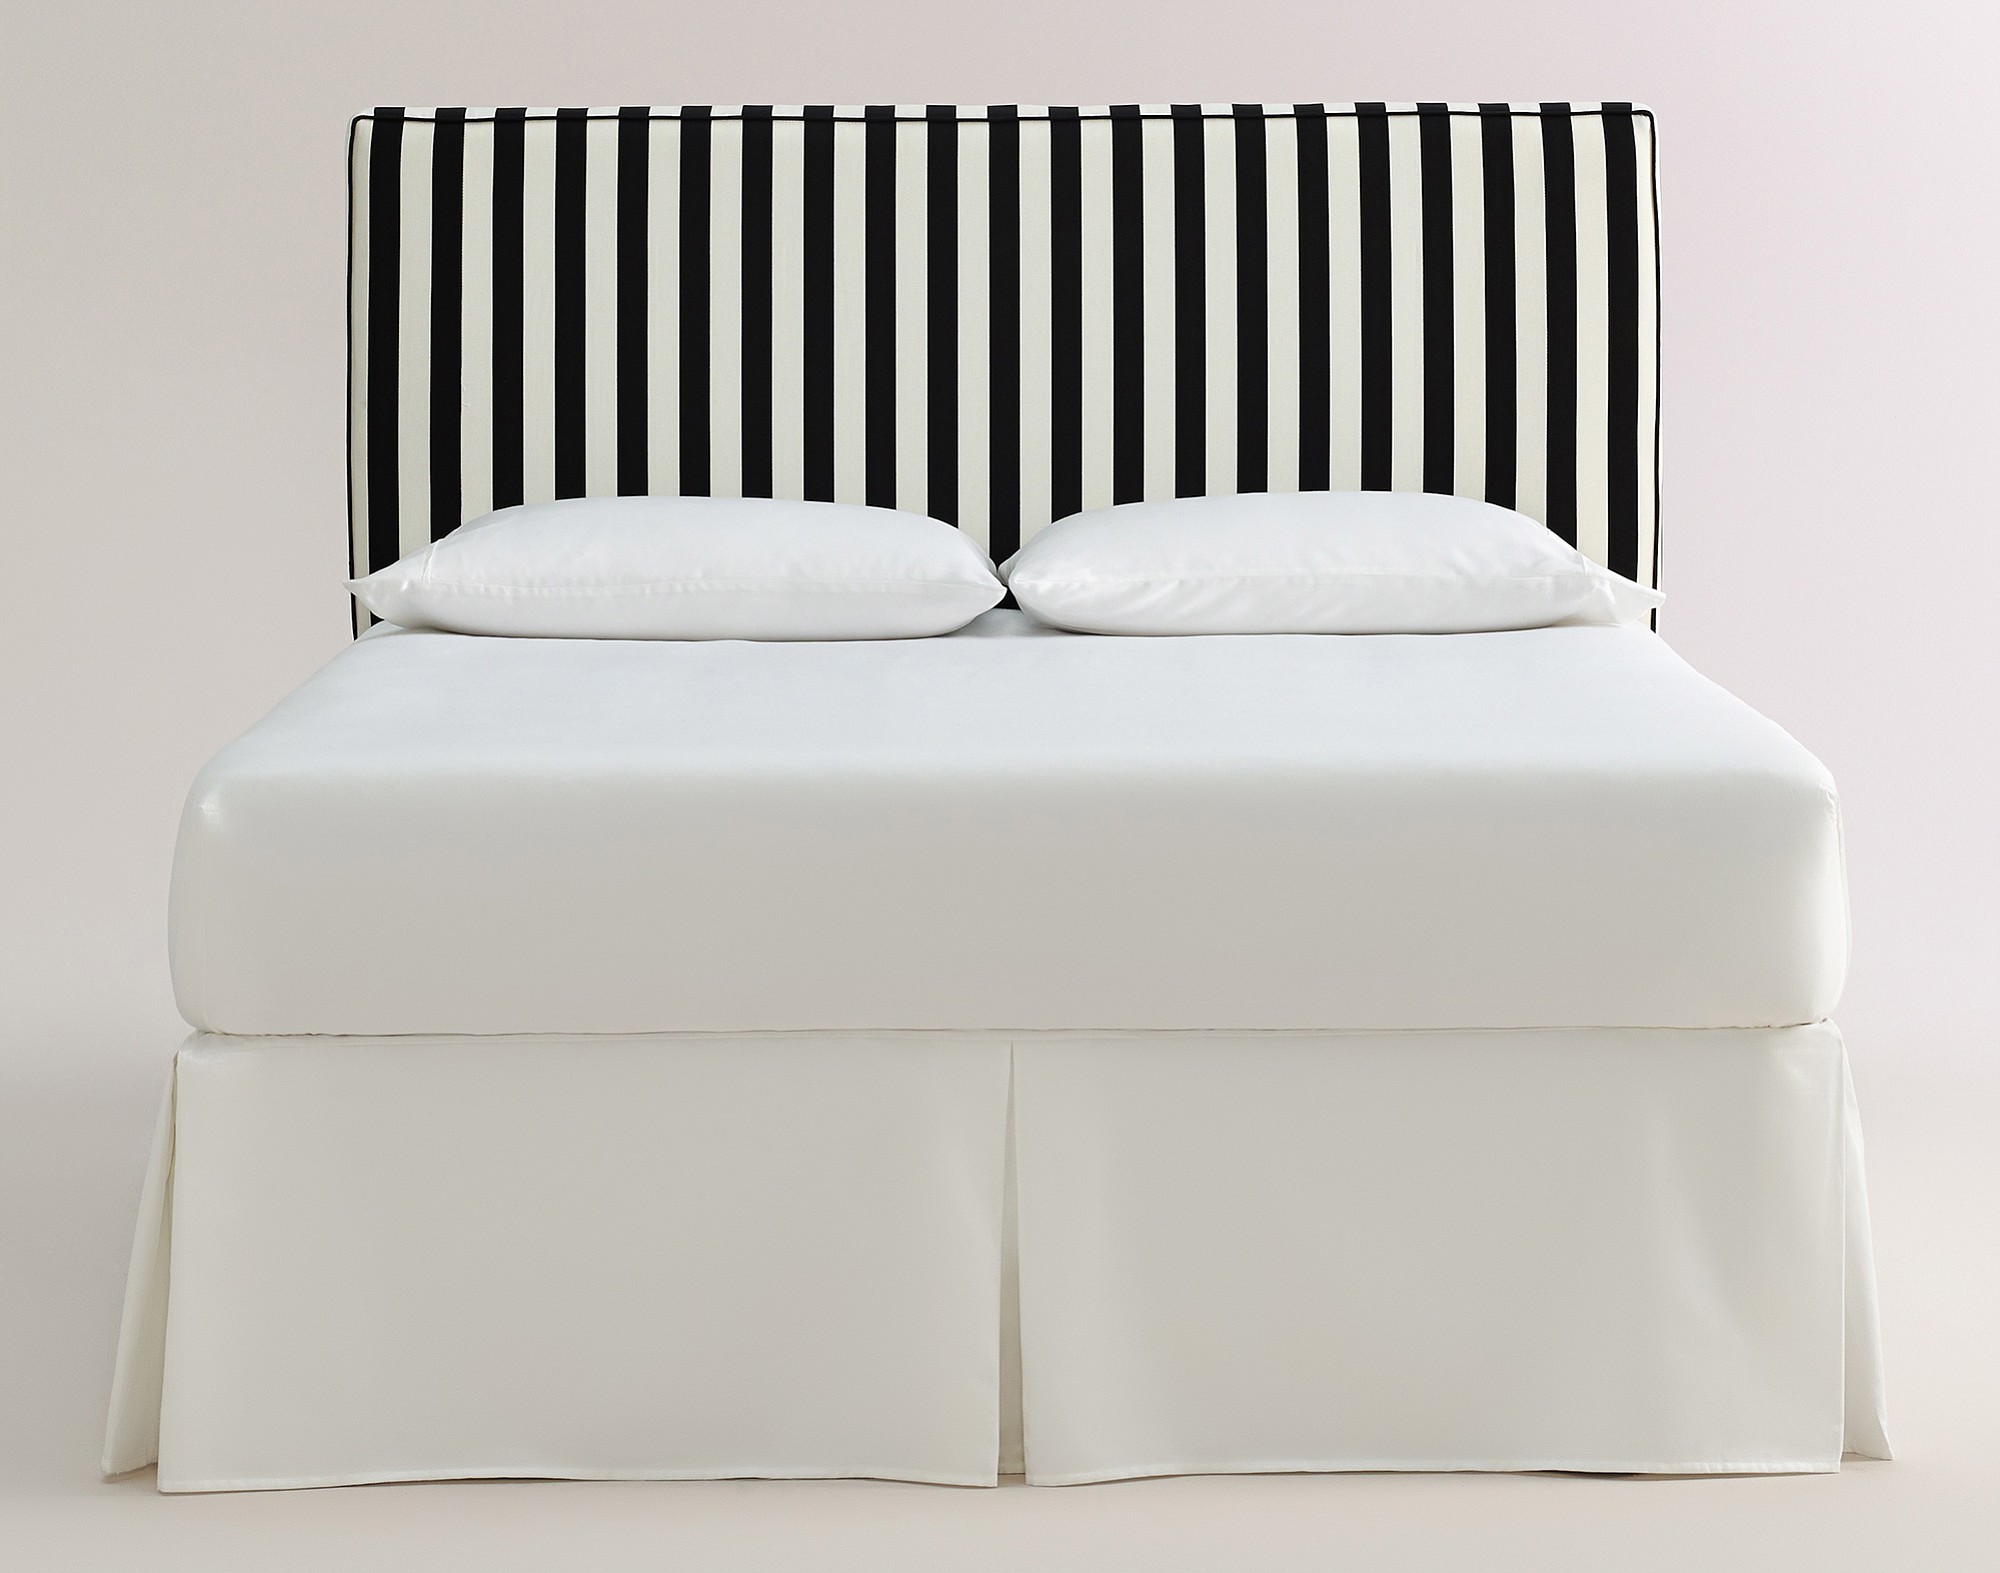 Stripes in a headboard like this black-and-white Canopy Stripe Loran Headboard from World Market can create a focal point in a room.